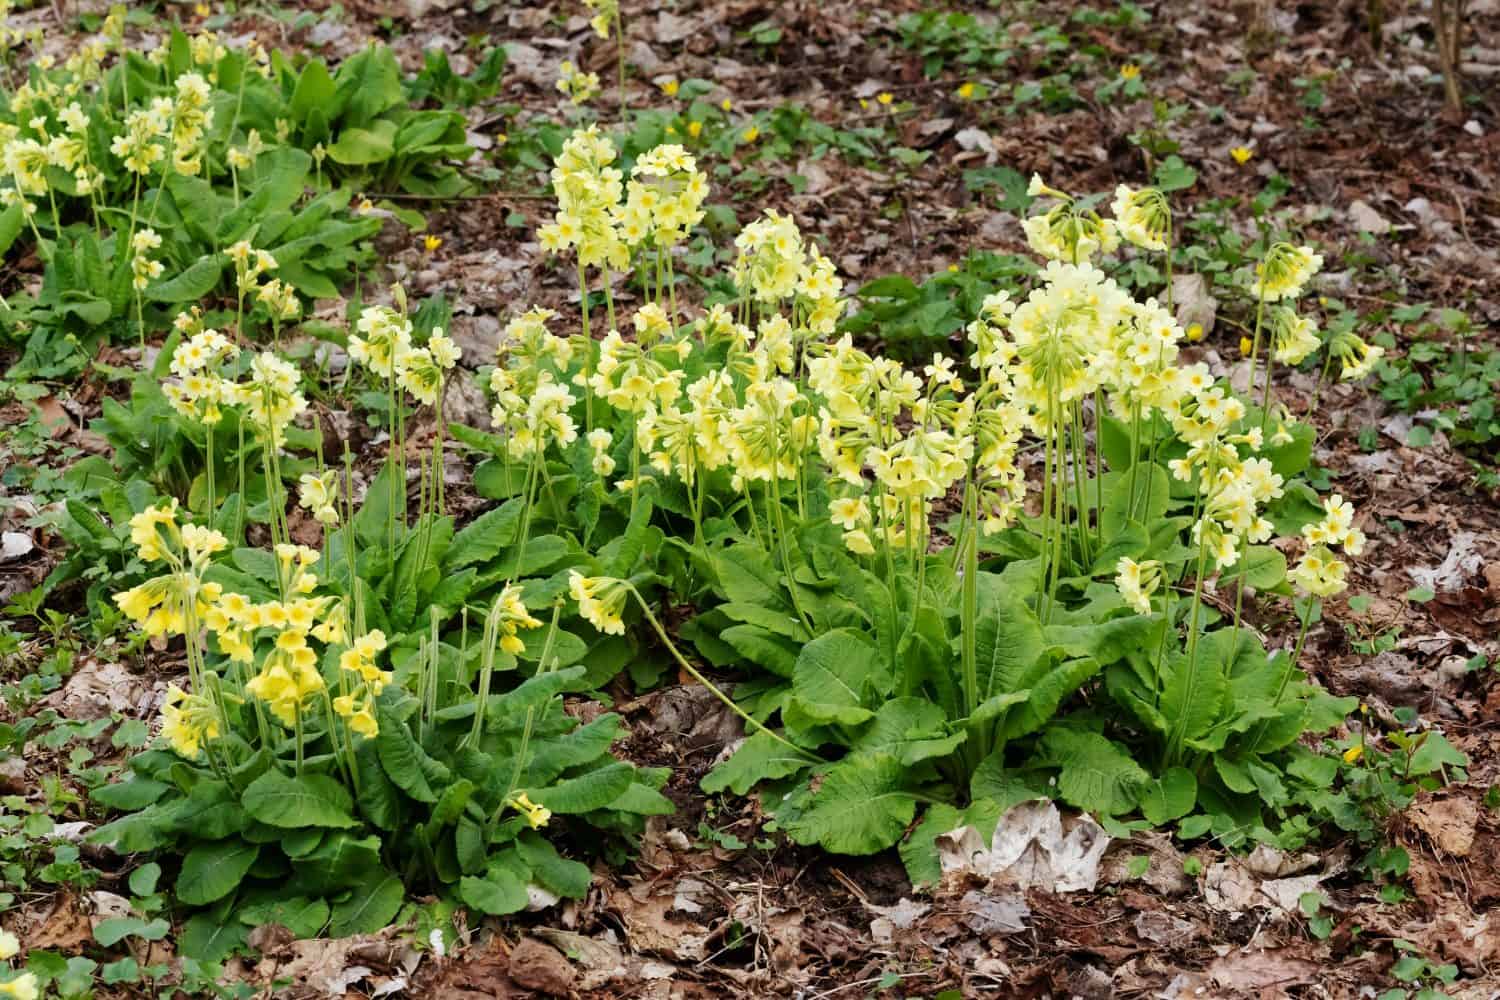 The light yellow flowers and leaves of the true oxlip (Primula elatior). The true oxlip is one of the first flowers to bloom in springtime.